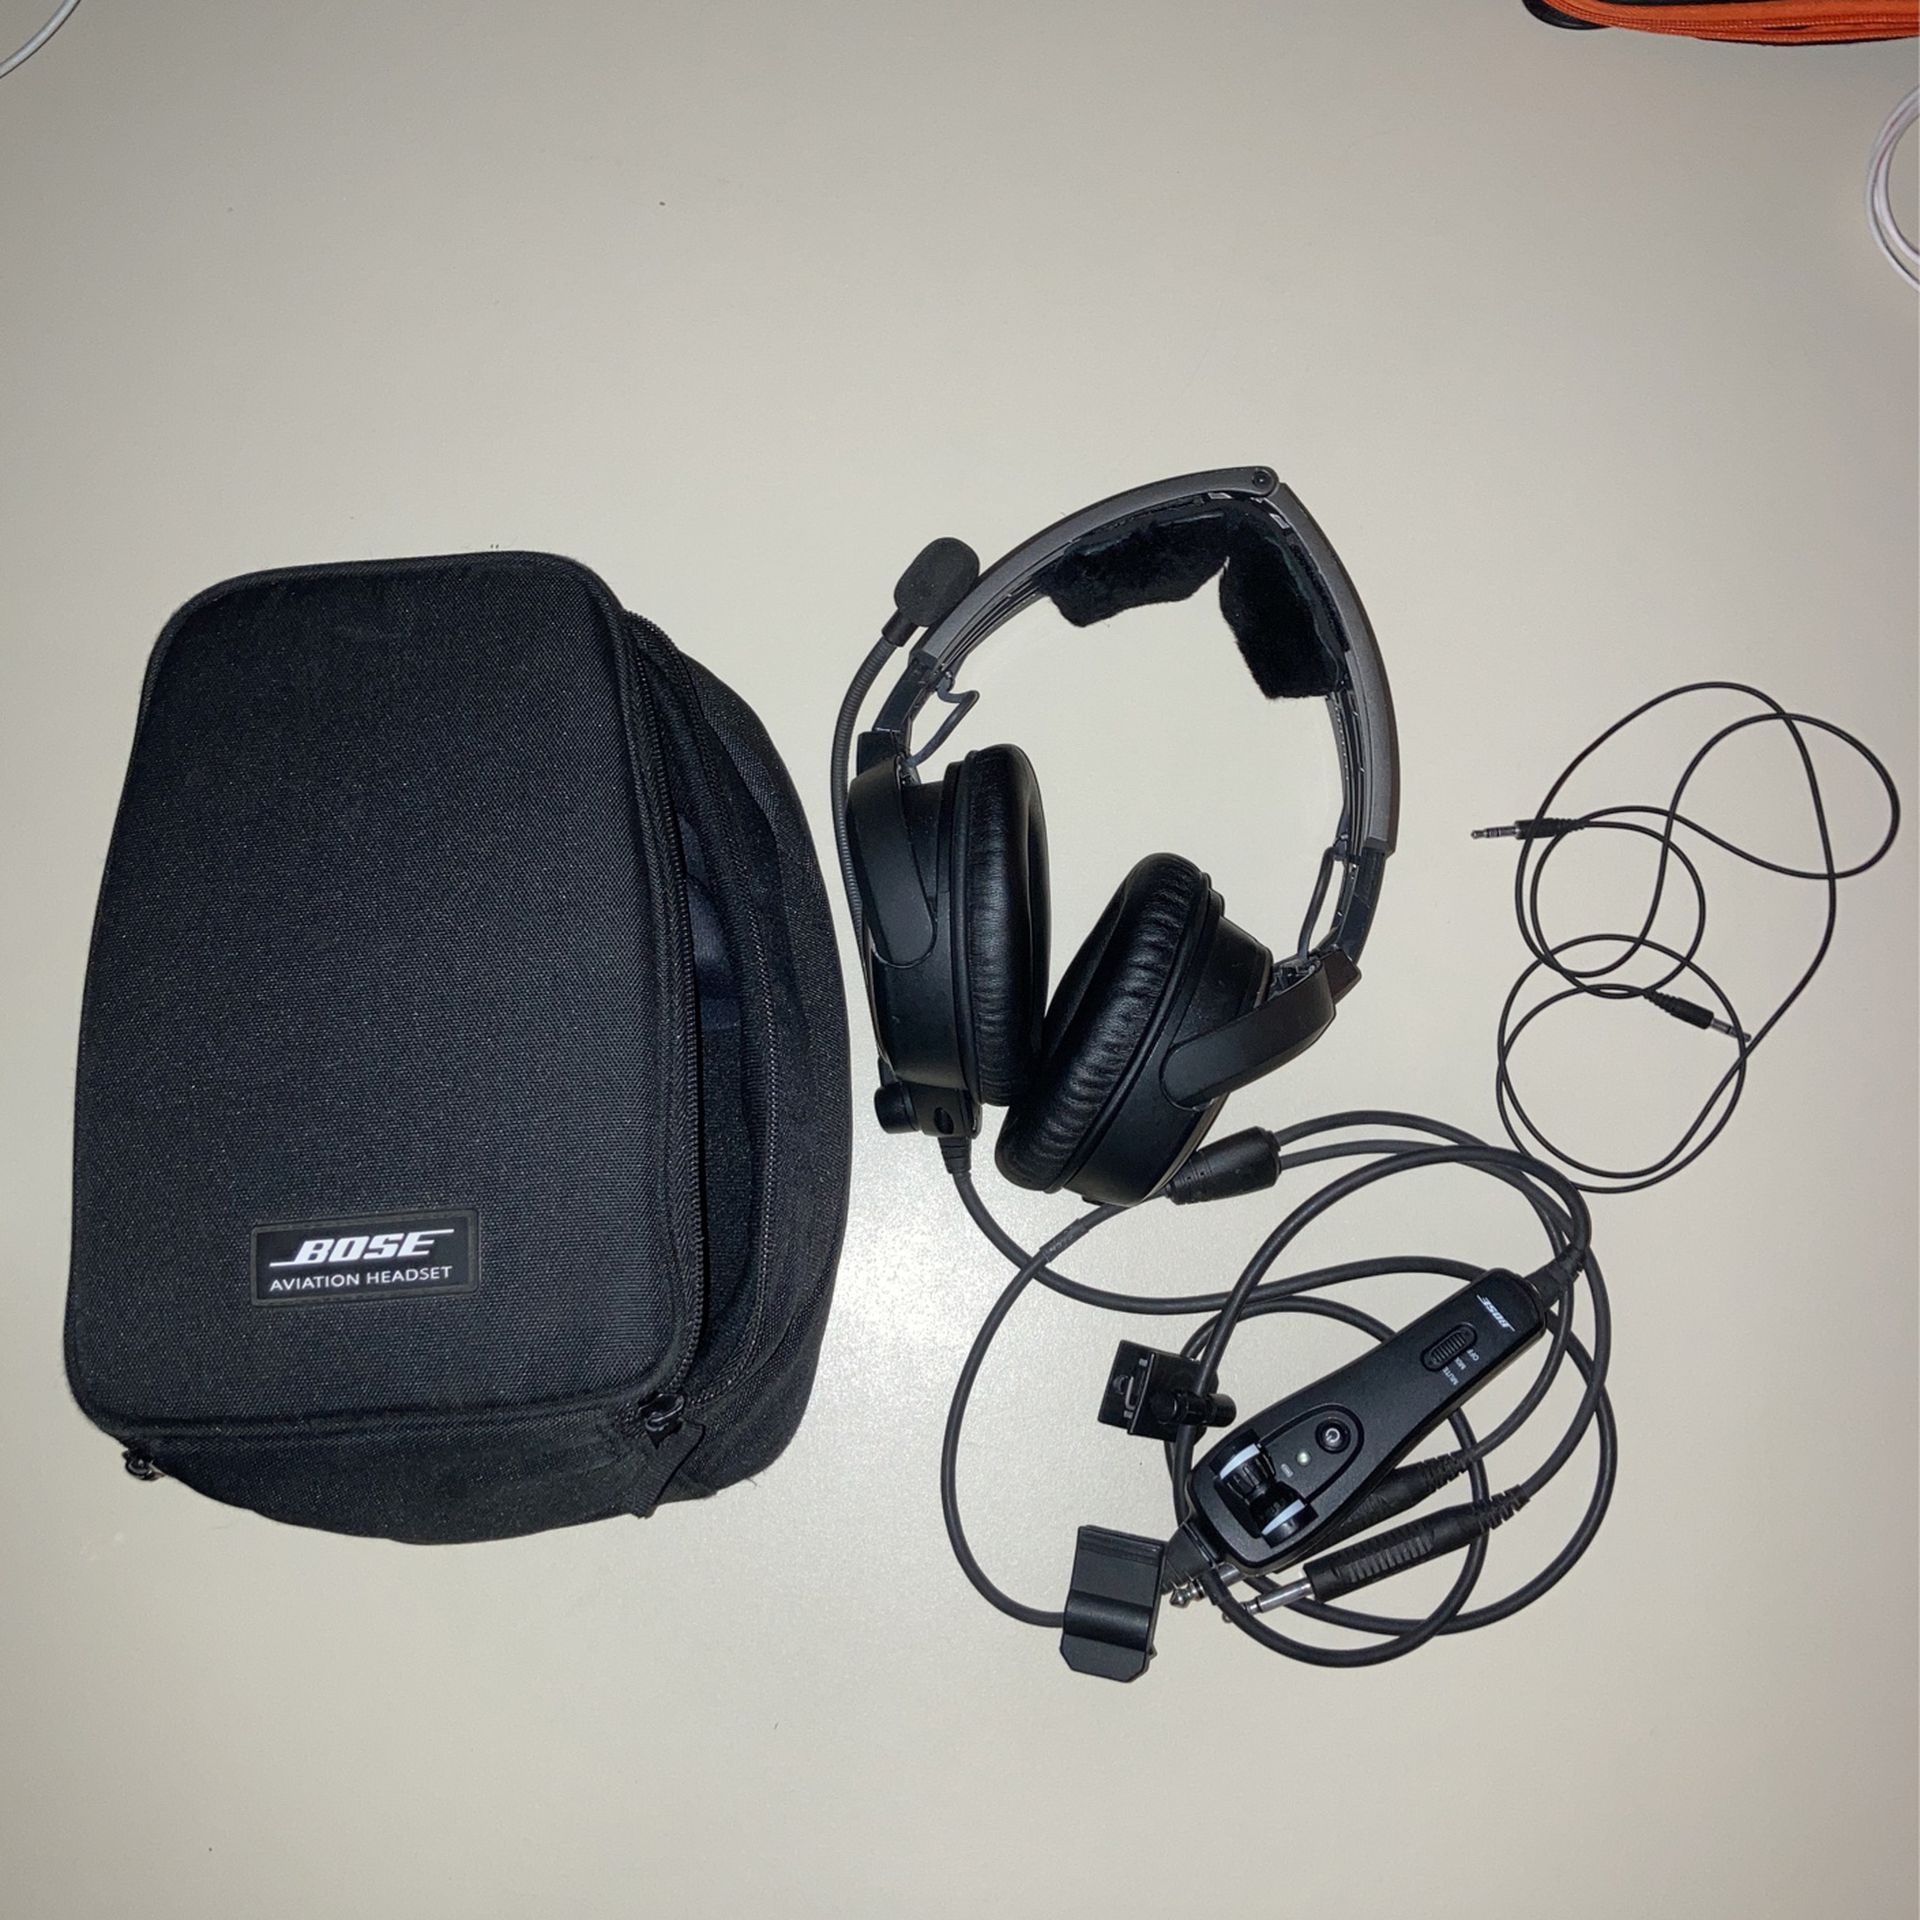 A20 Headset for Sale in Mesa, AZ - OfferUp